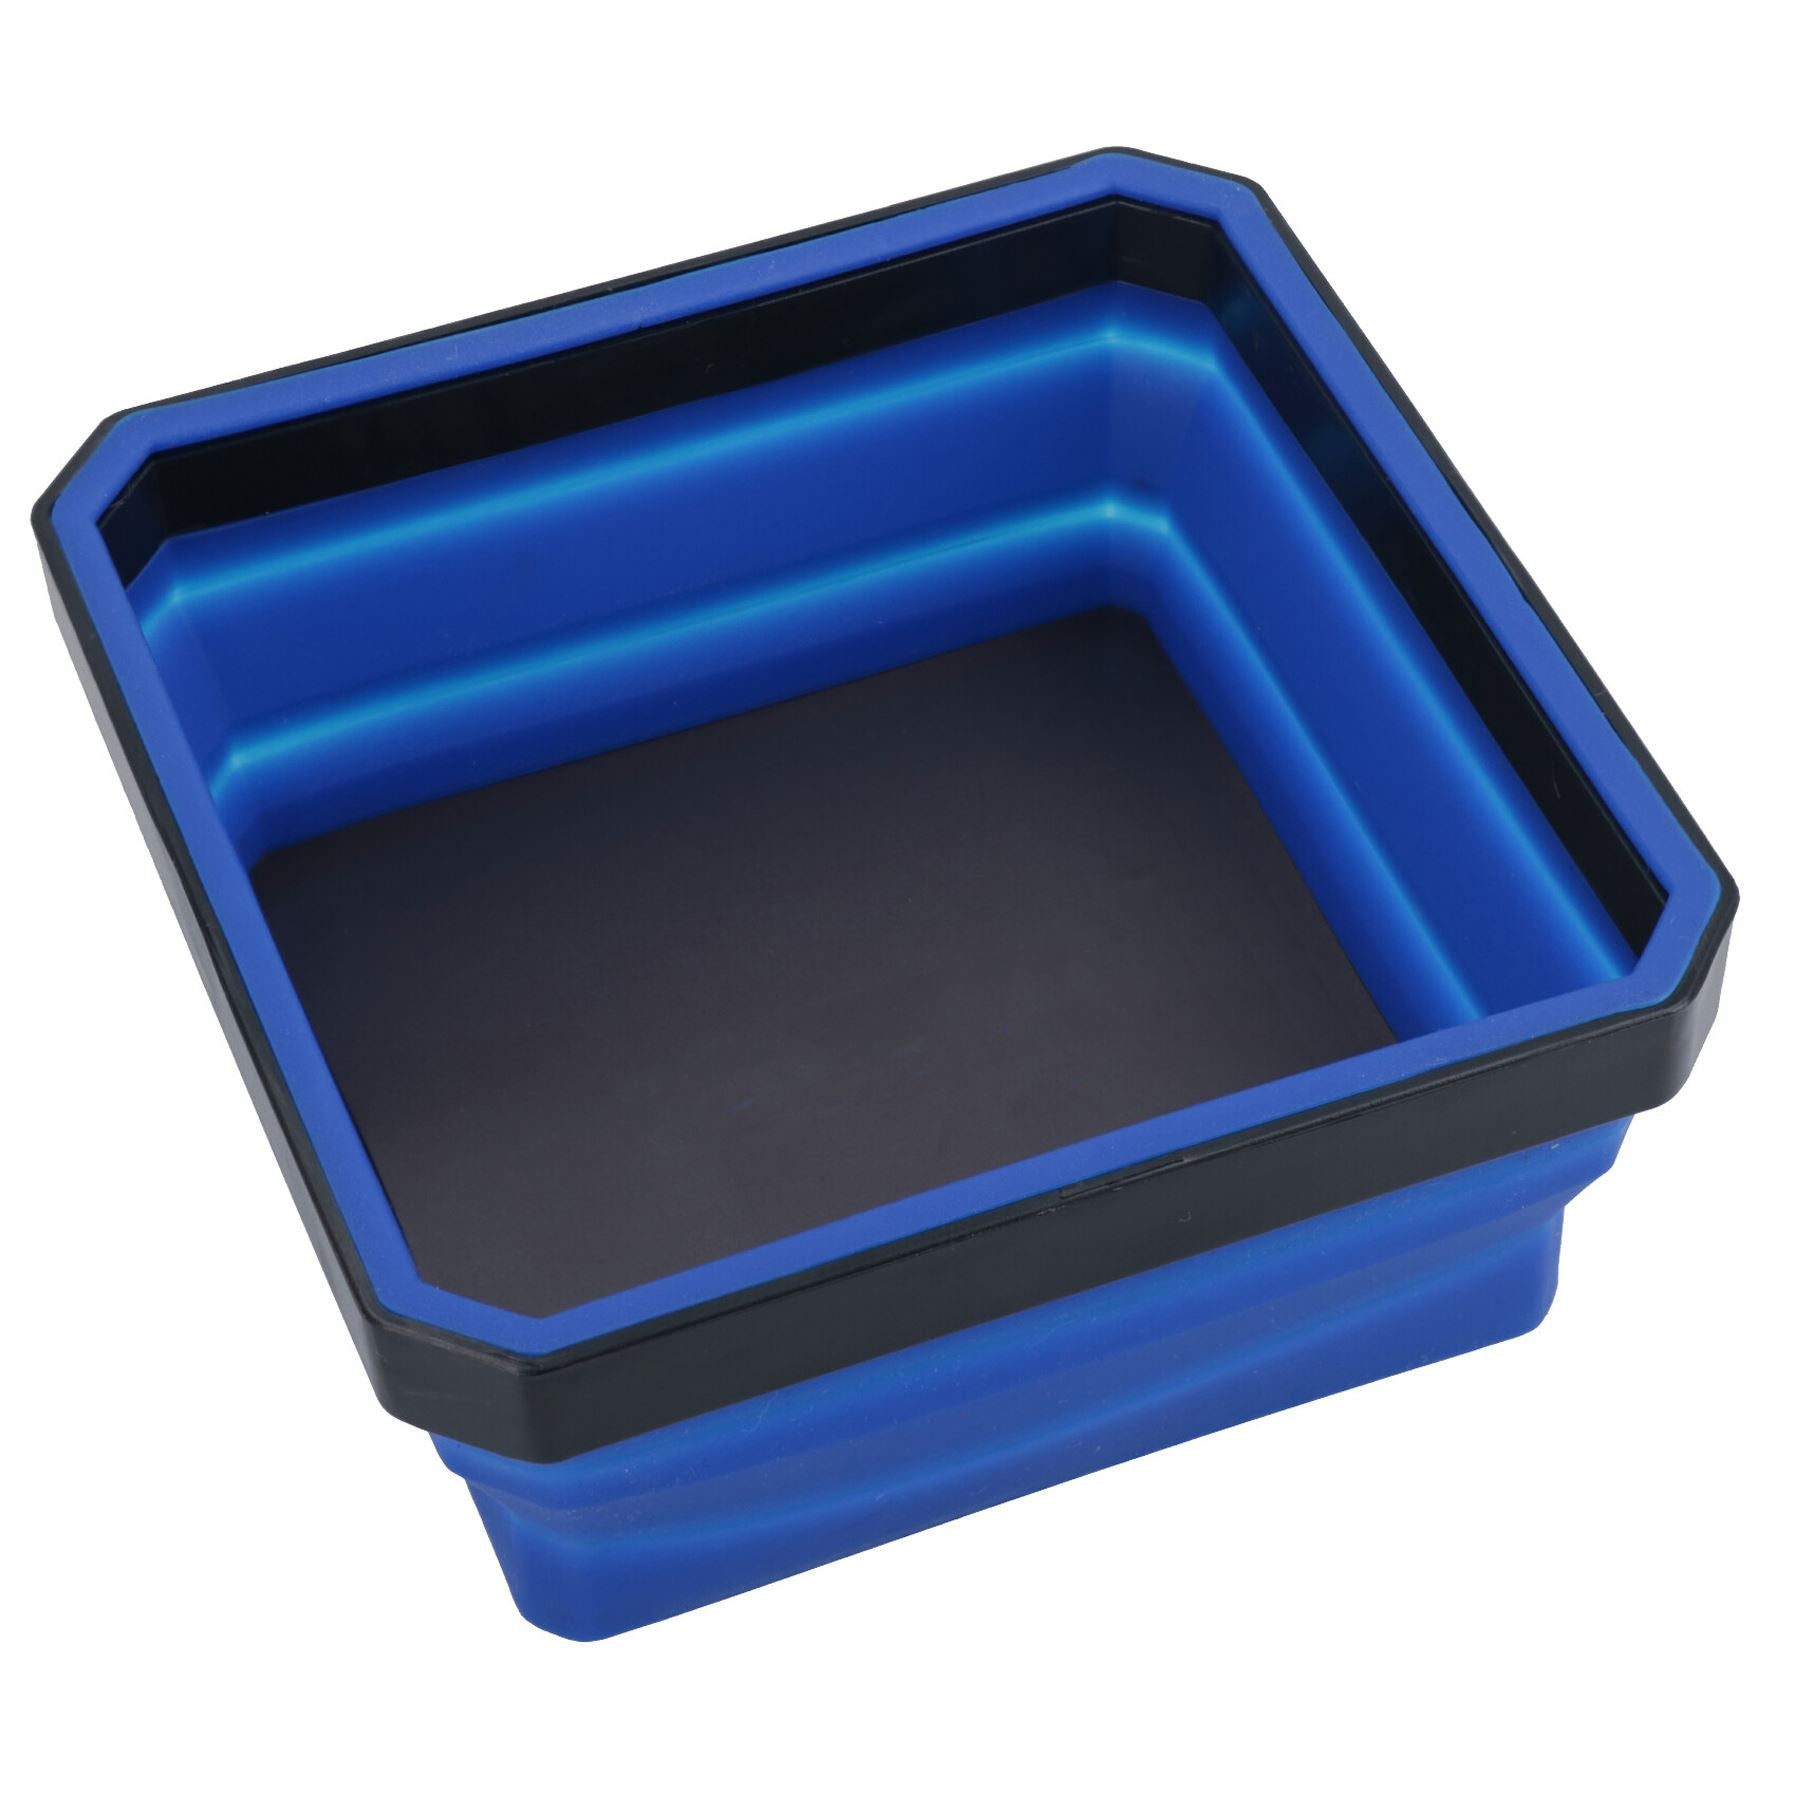 Collapsible Magnetic Parts Tray Dish Storage Bowl Holder Oil Resistant Plastic